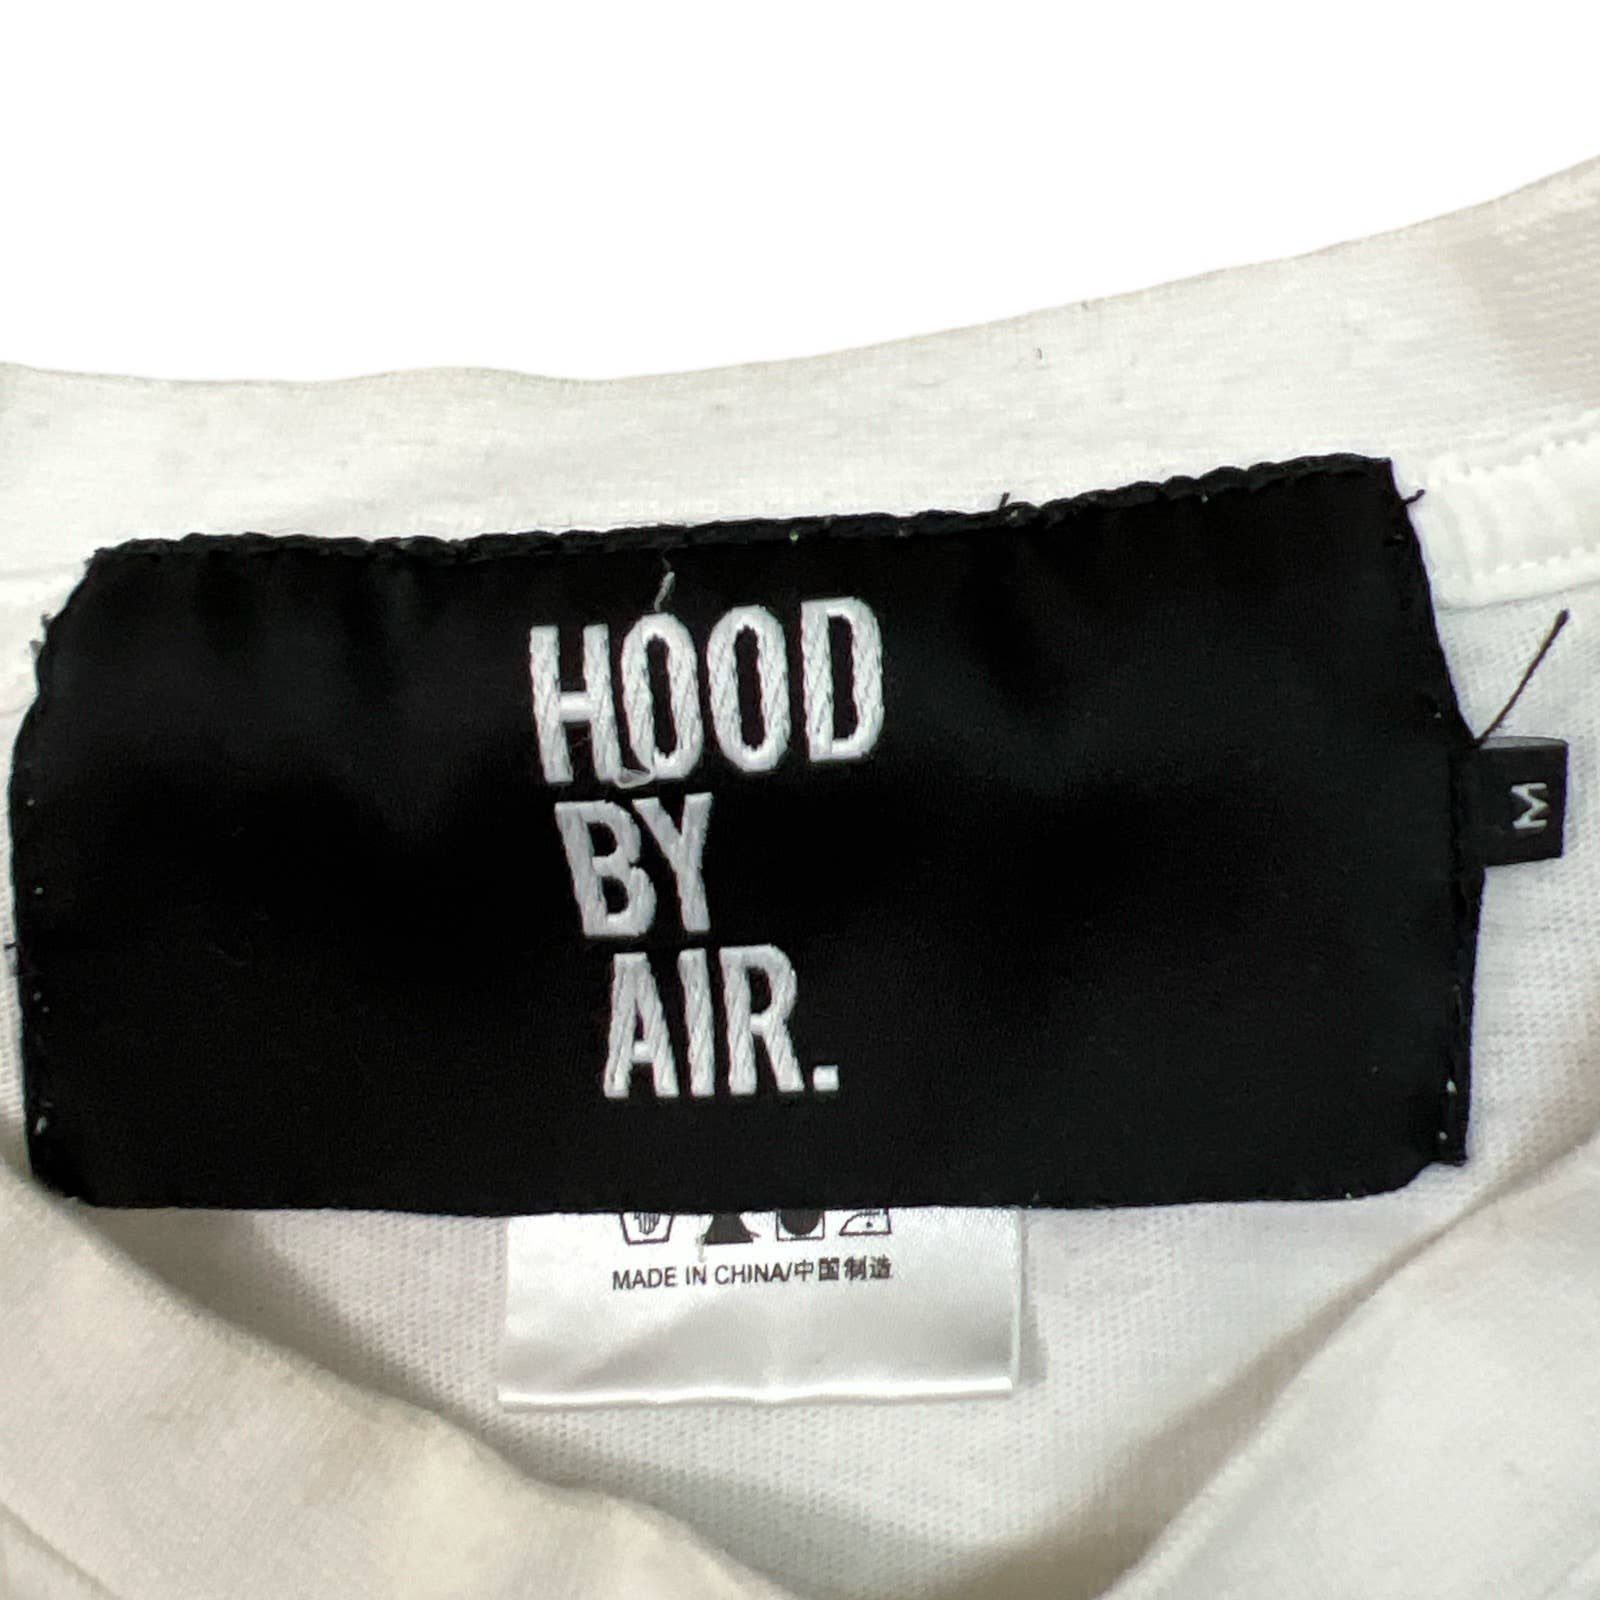 Hood By Air Hood By Air Pif Tee Size US M / EU 48-50 / 2 - 3 Preview